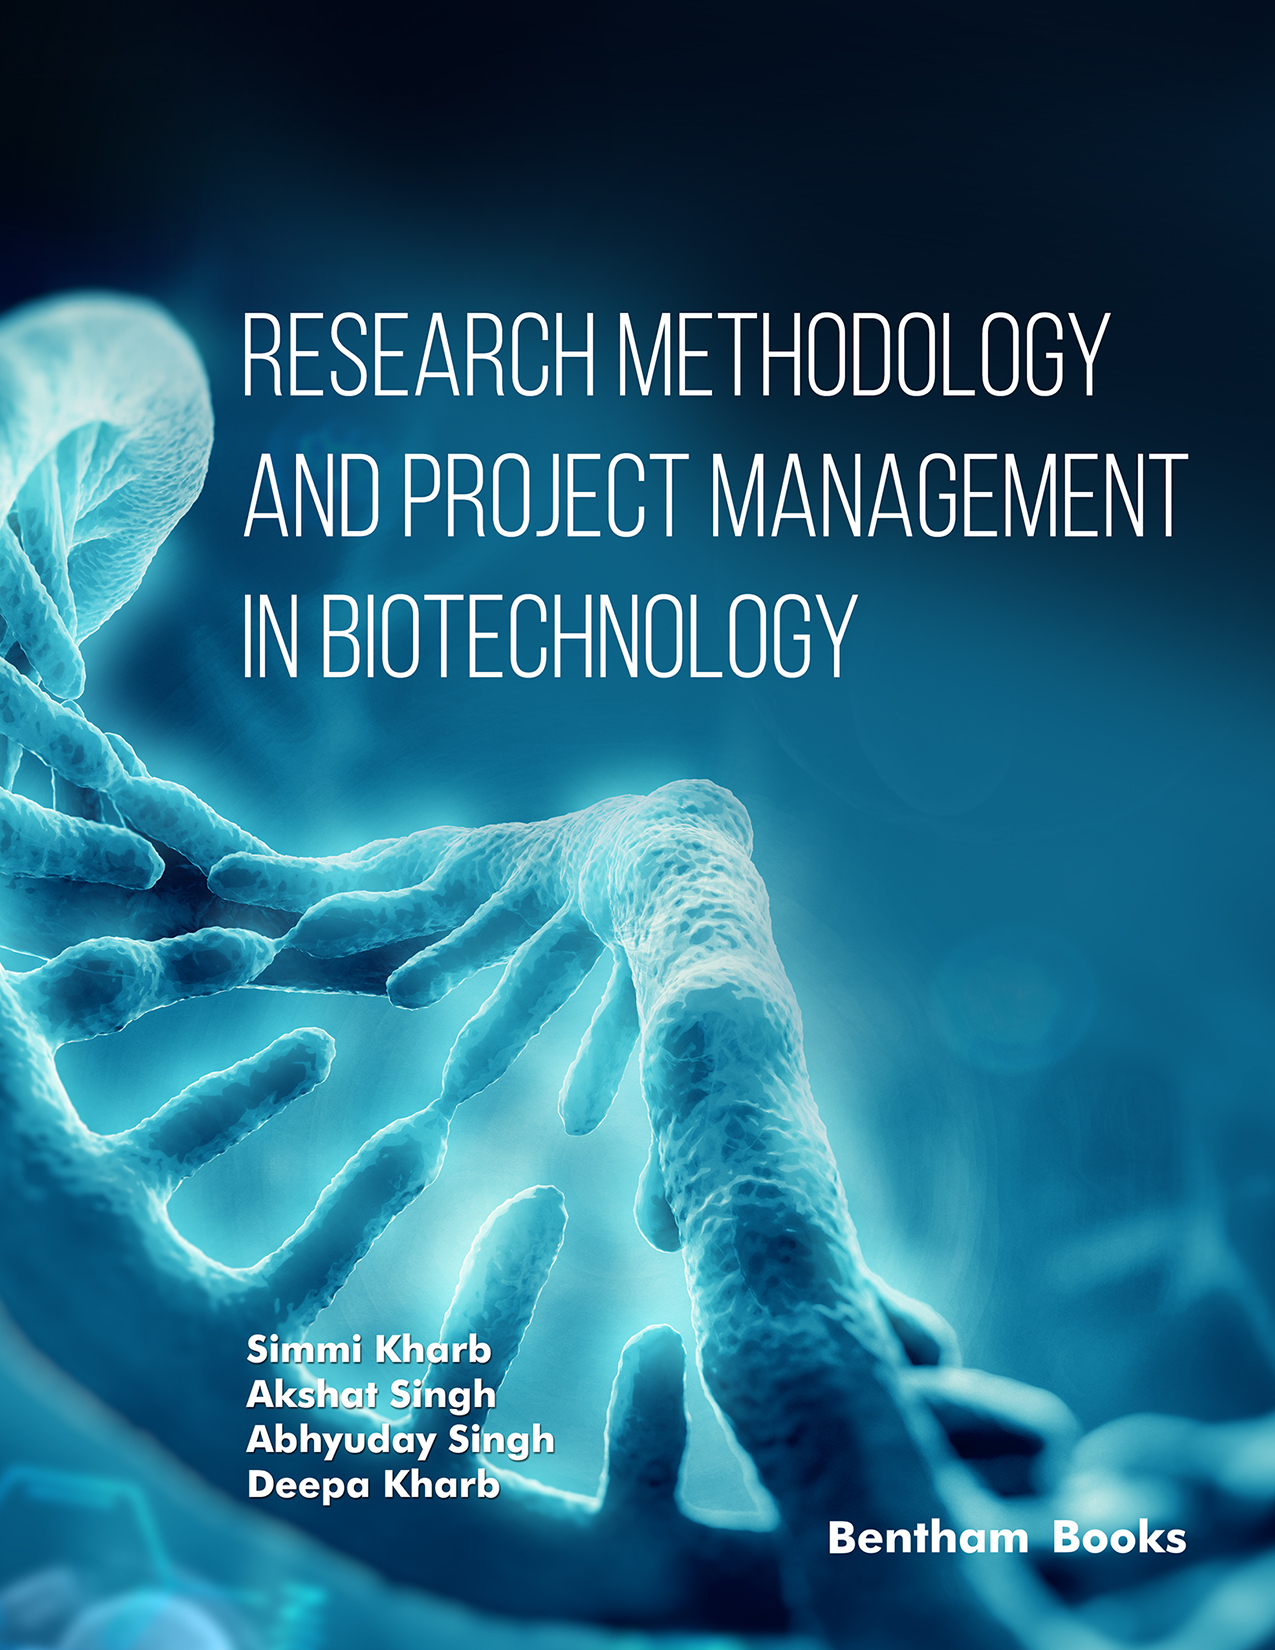 Research Methodology and Project Management in Biotechnology